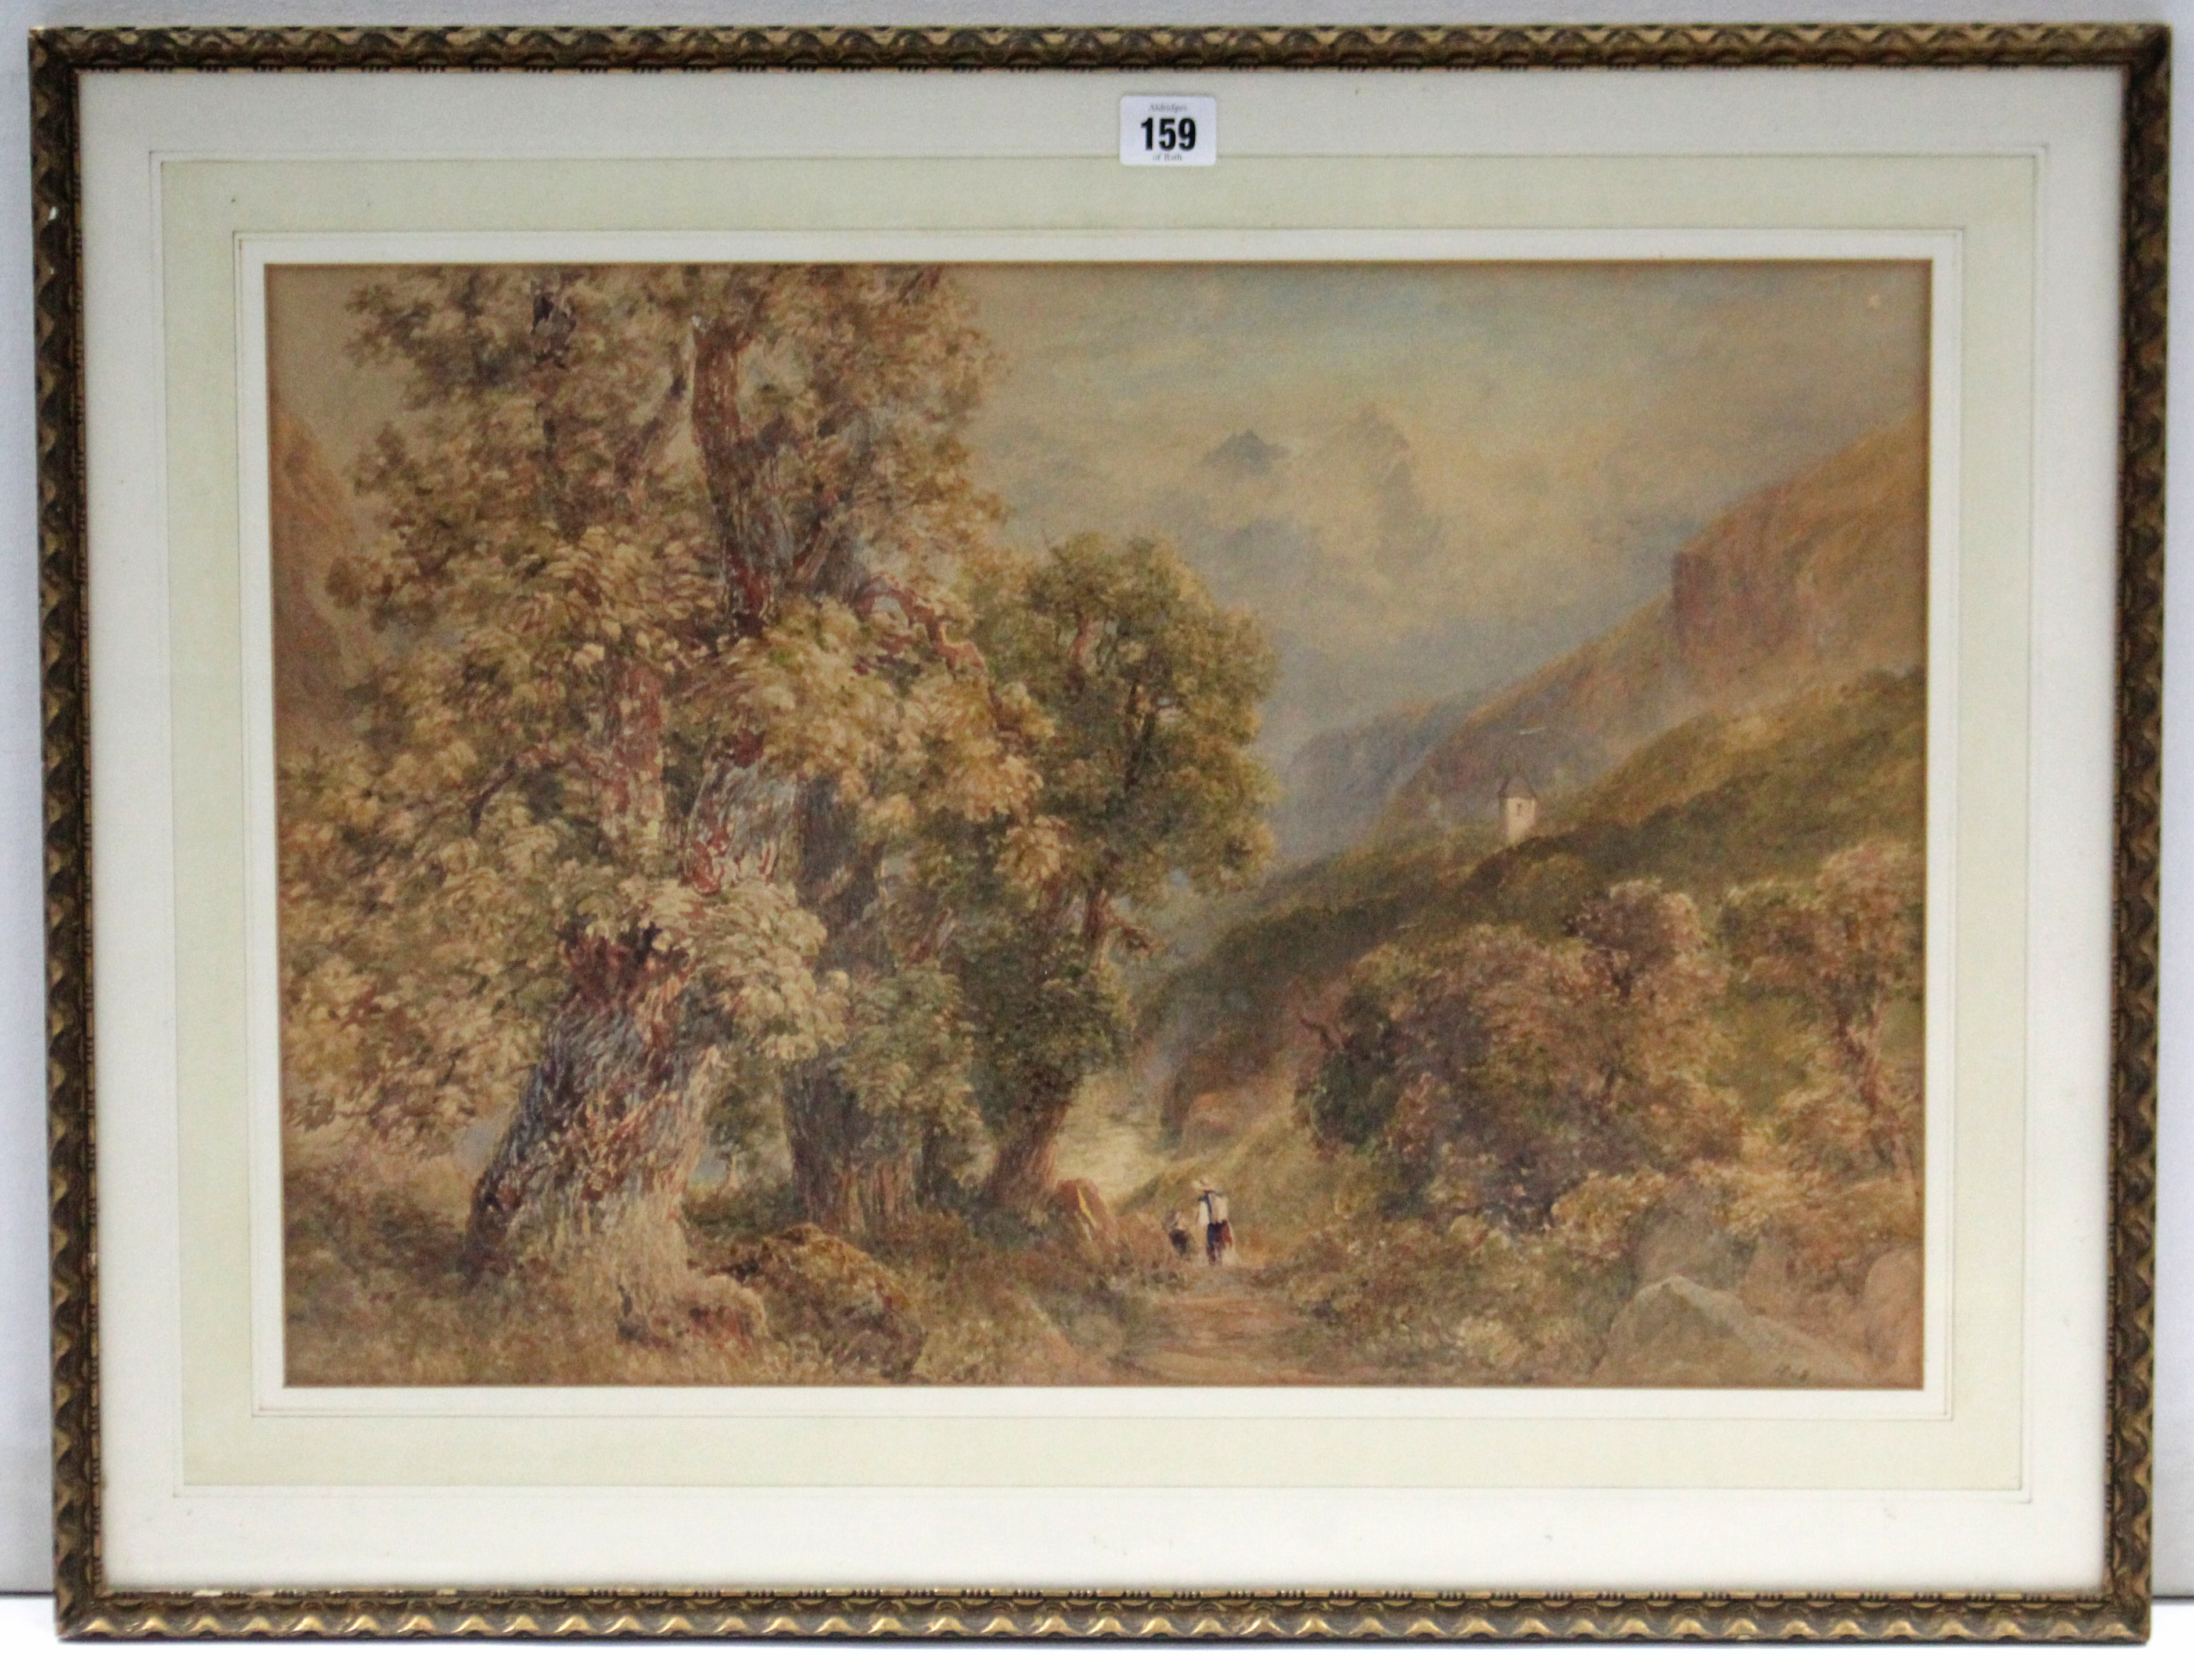 A Victorian watercolour painting by William Bennett titled to reverse “Figures on a Mountain